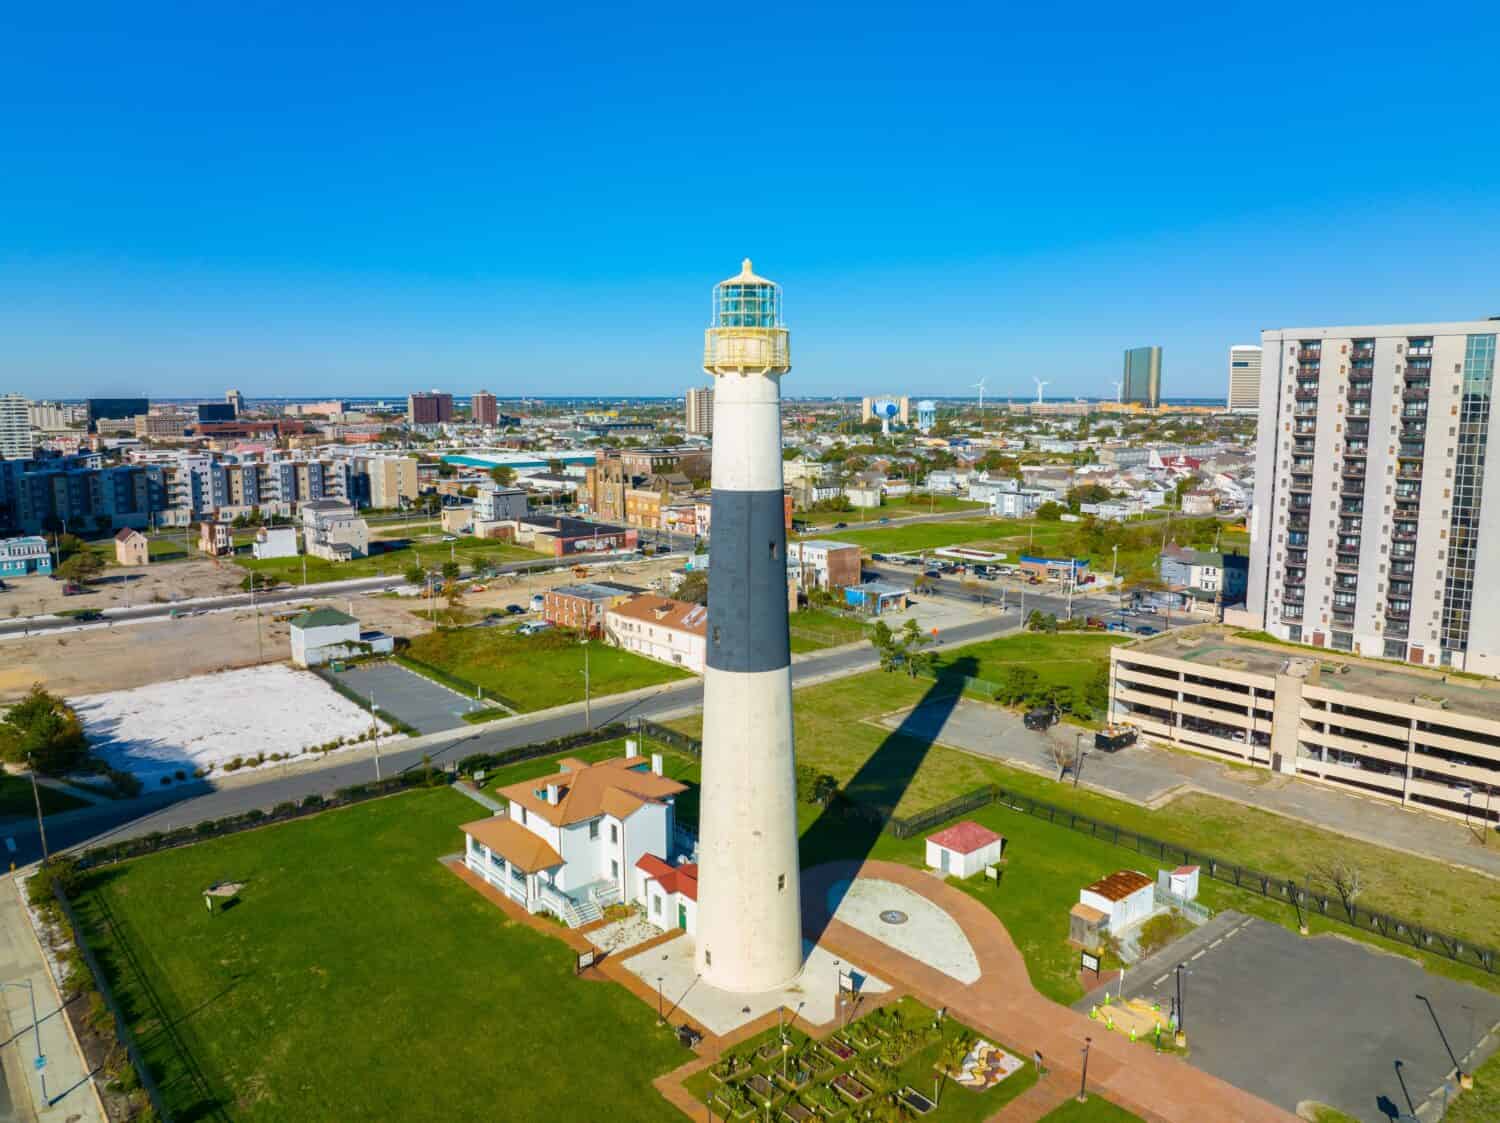 Absecon Lighthouse aerial view at the mouth of Absecon Inlet in the north end of Atlantic City, New Jersey NJ, USA. The light house was built in 1856 and is the tallest Lighthouse in New Jersey. 